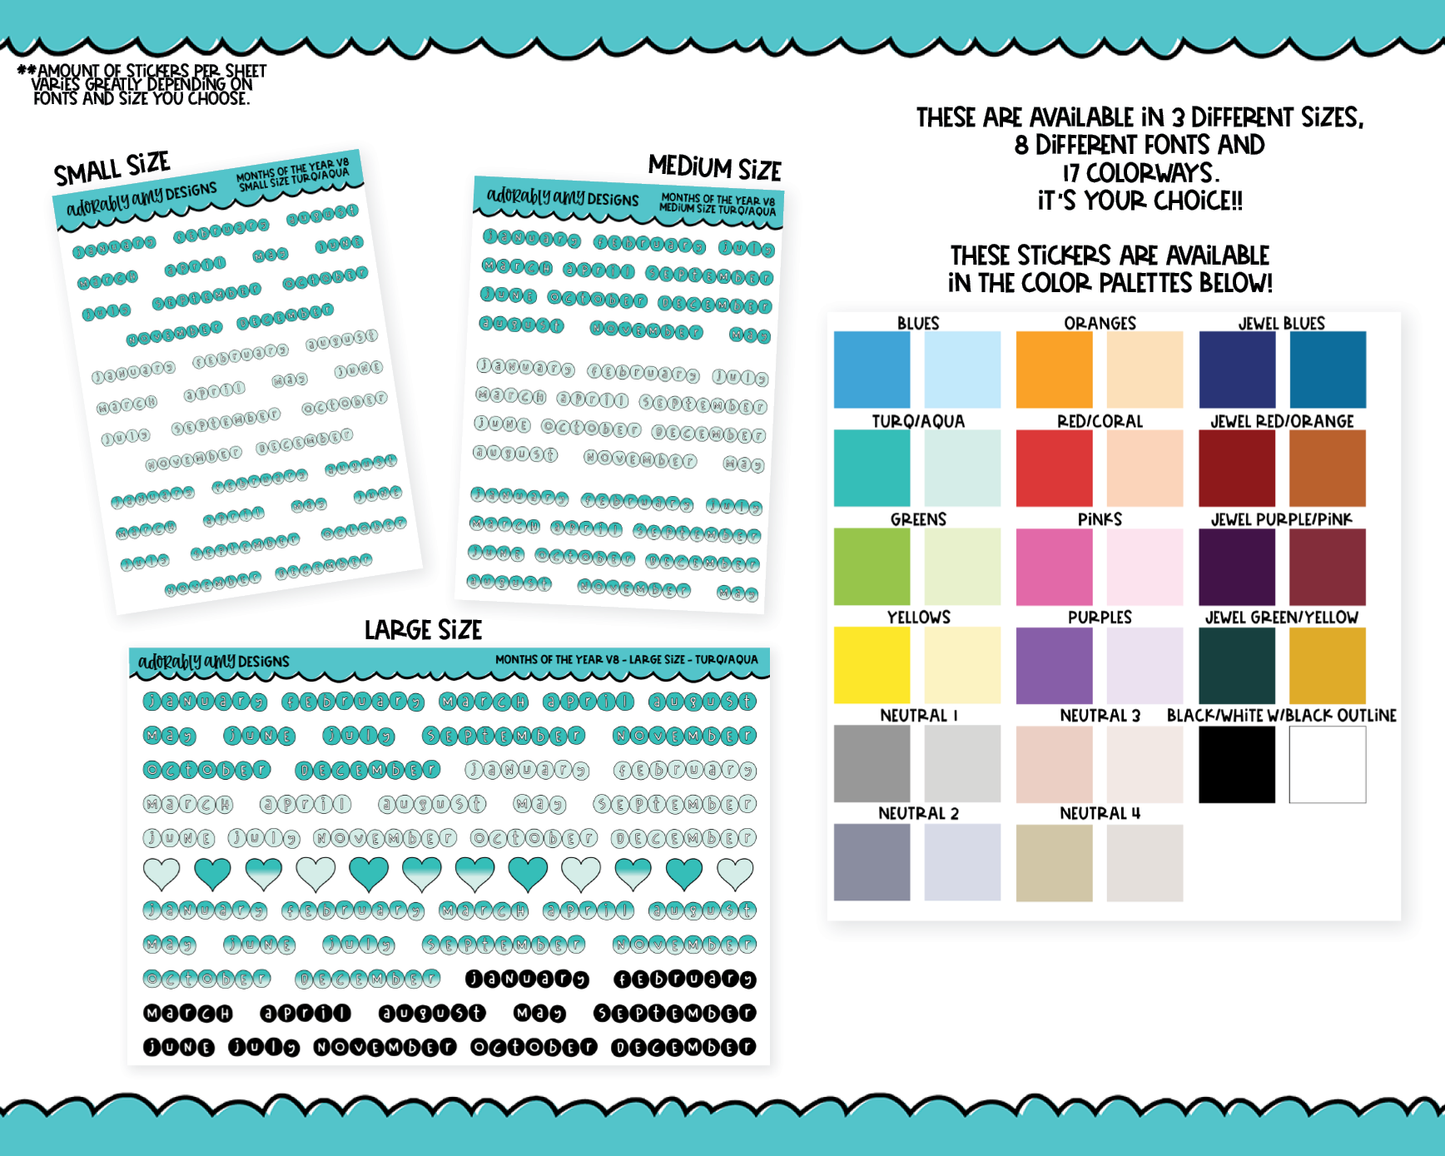 Rainbow or Black Months of the Year - 8 Fonts - Stickers Planner Stickers for any Planner or Insert